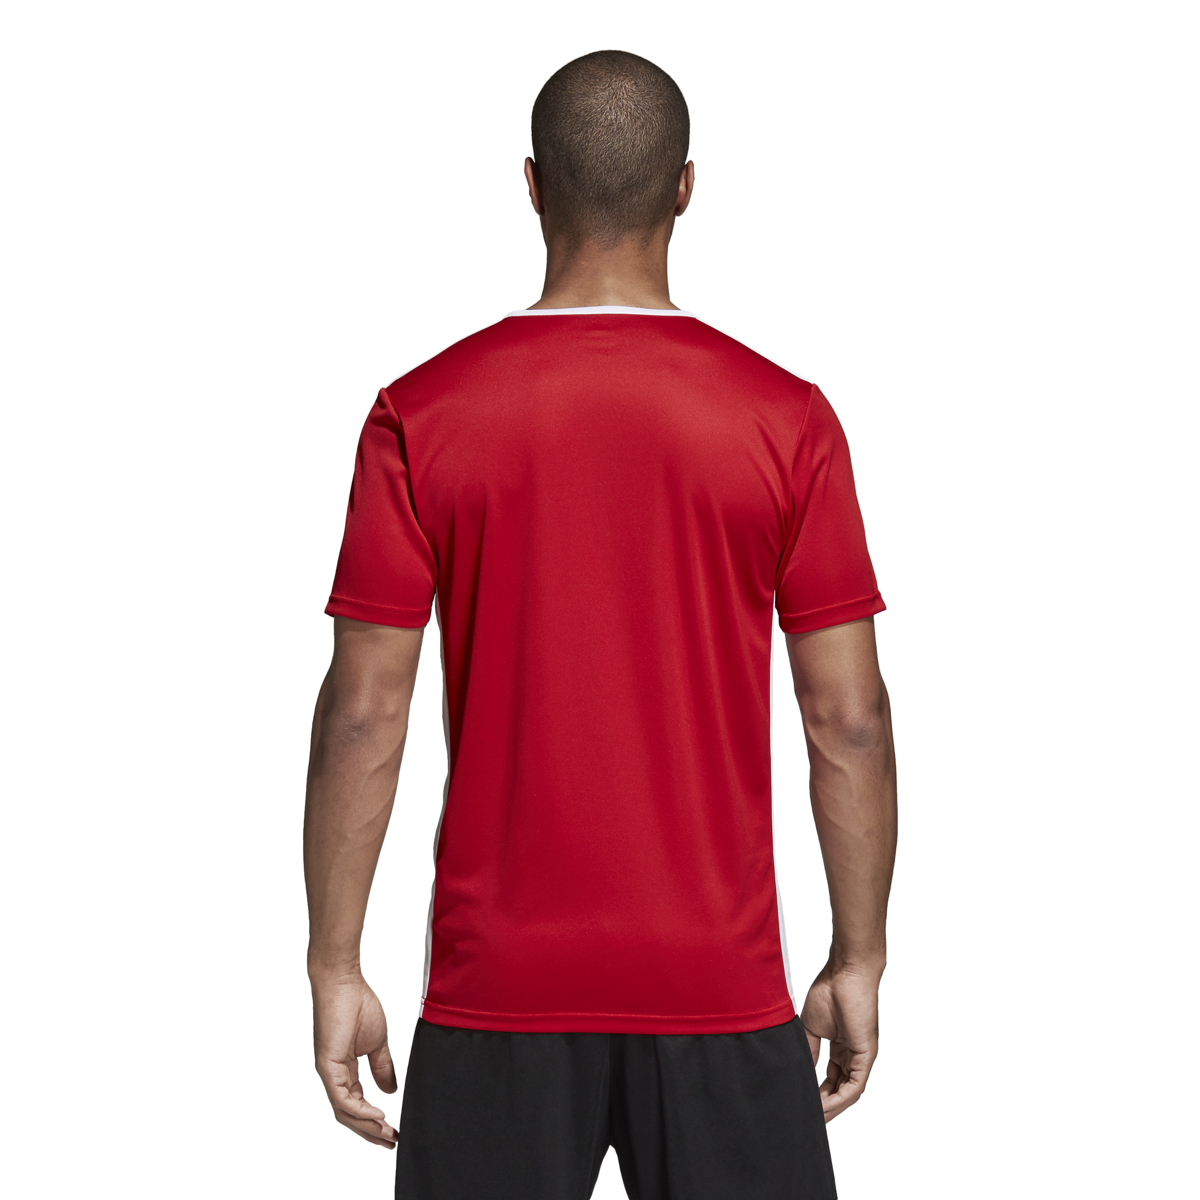 Men's Adidas Entrada 18 Soccer Jersey Red/White - XL - image 2 of 6